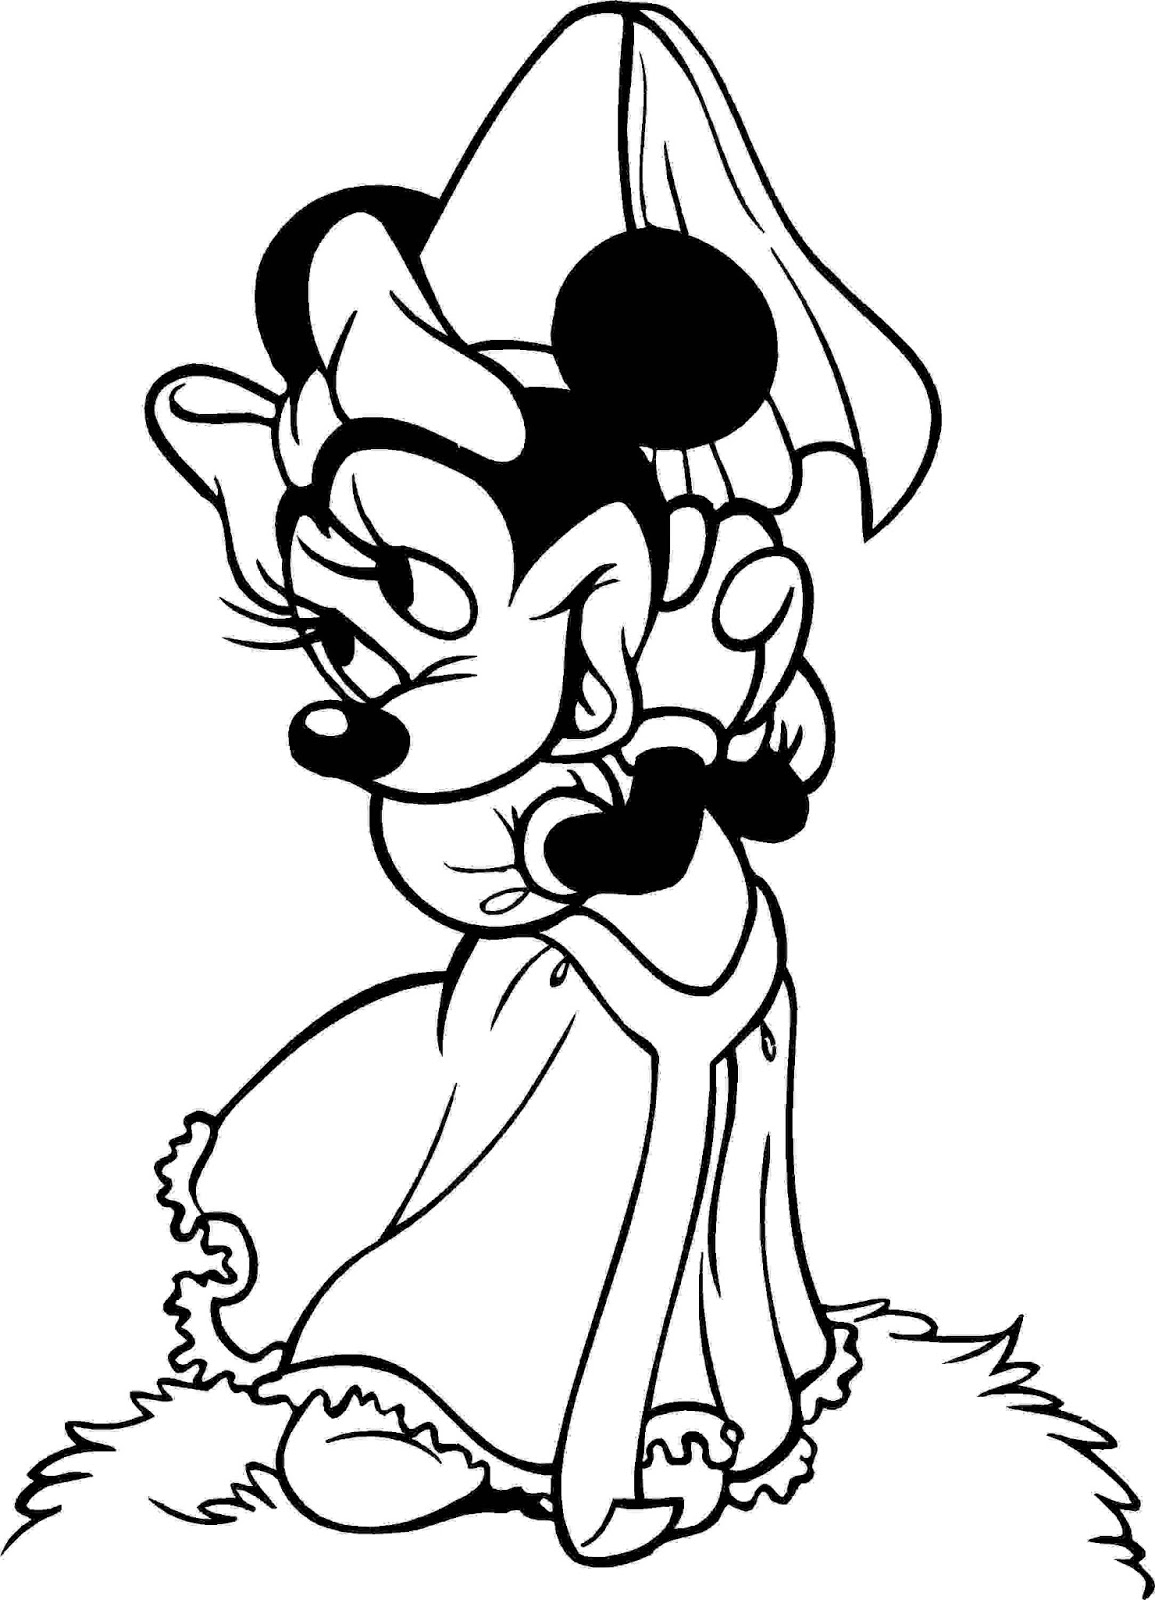 minnie mouse printable coloring pages minnie mouse coloring pages getcoloringpagescom pages coloring minnie printable mouse 